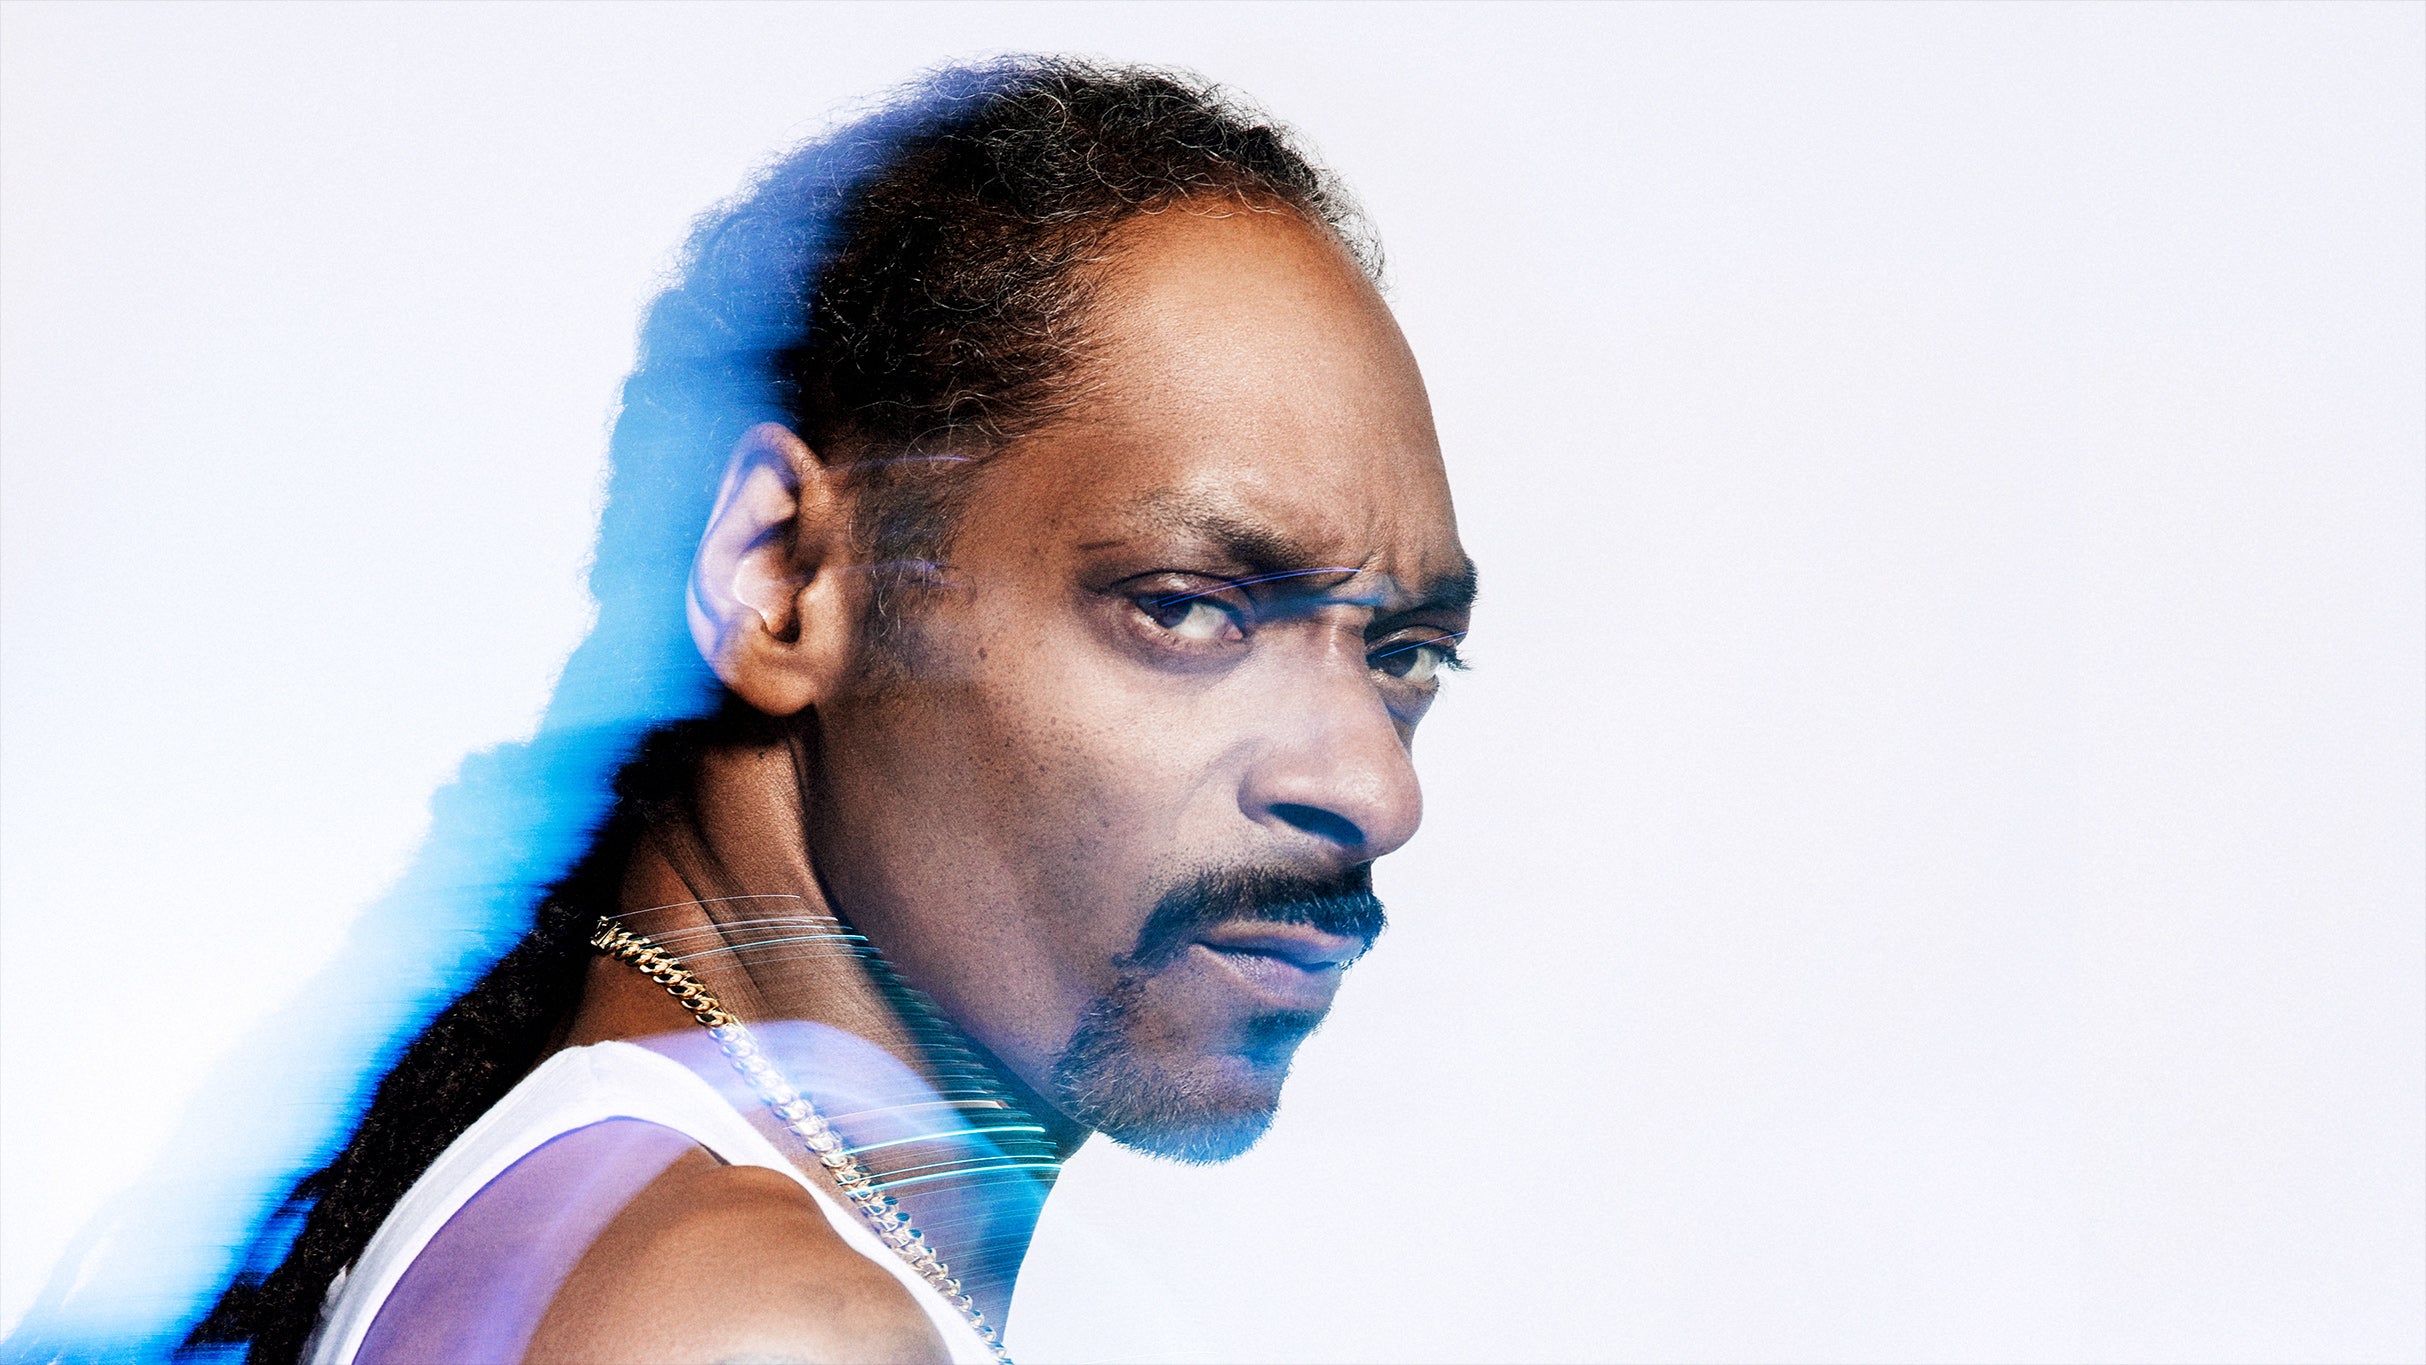 Snoop Dogg - Cali To Canada Tour  pre-sale password for event tickets in Halifax, NS (Scotiabank Centre)